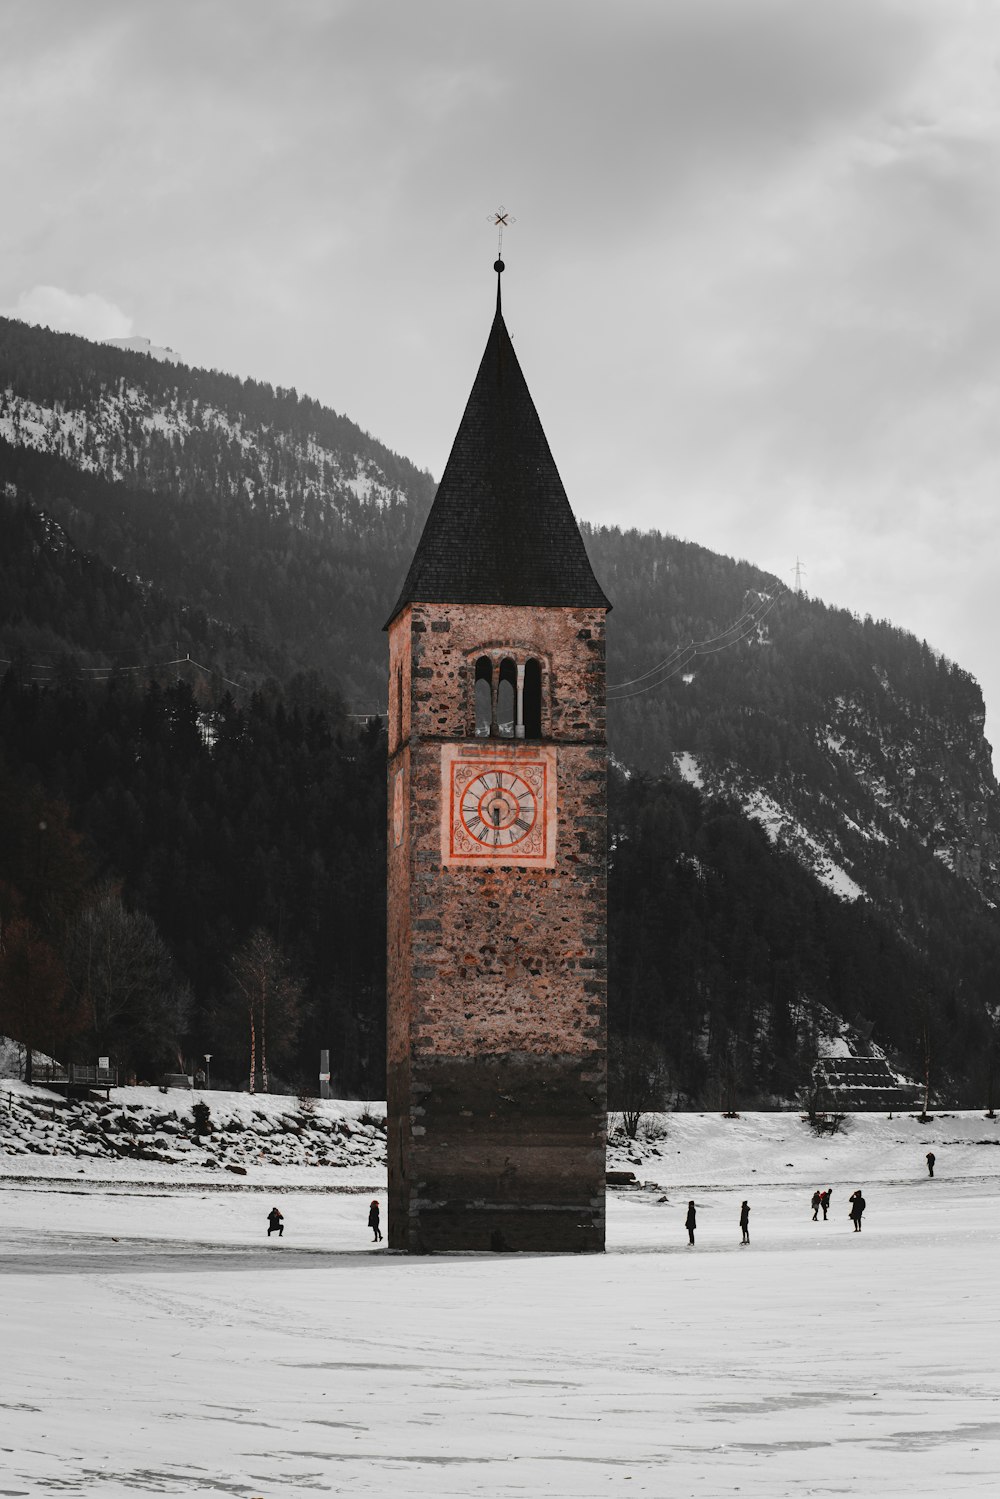 a clock tower in the middle of a snowy field